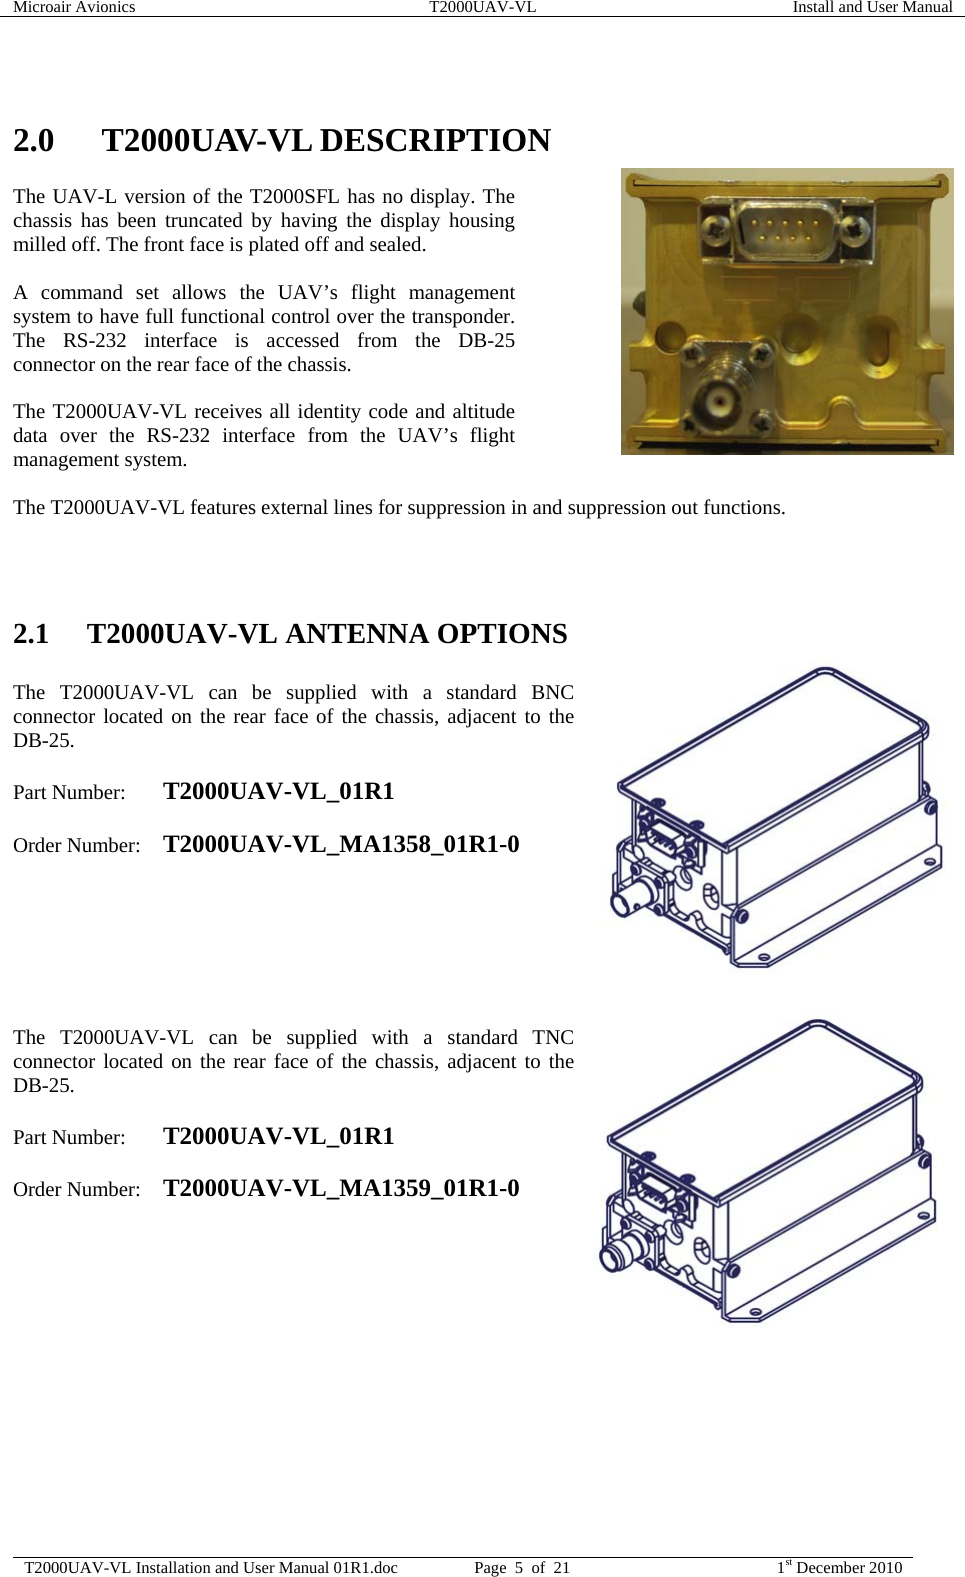 Microair Avionics  T2000UAV-VL  Install and User Manual  T2000UAV-VL Installation and User Manual 01R1.doc  Page  5  of  21  1st December 2010   2.0 T2000UAV-VL DESCRIPTION The UAV-L version of the T2000SFL has no display. The chassis has been truncated by having the display housing milled off. The front face is plated off and sealed.  A command set allows the UAV’s flight management system to have full functional control over the transponder. The RS-232 interface is accessed from the DB-25 connector on the rear face of the chassis.  The T2000UAV-VL receives all identity code and altitude data over the RS-232 interface from the UAV’s flight management system.  The T2000UAV-VL features external lines for suppression in and suppression out functions.    2.1 T2000UAV-VL ANTENNA OPTIONS  The T2000UAV-VL can be supplied with a standard BNC connector located on the rear face of the chassis, adjacent to the DB-25.  Part Number:  T2000UAV-VL_01R1  Order Number: T2000UAV-VL_MA1358_01R1-0        The T2000UAV-VL can be supplied with a standard TNC connector located on the rear face of the chassis, adjacent to the DB-25.  Part Number:  T2000UAV-VL_01R1  Order Number: T2000UAV-VL_MA1359_01R1-0        